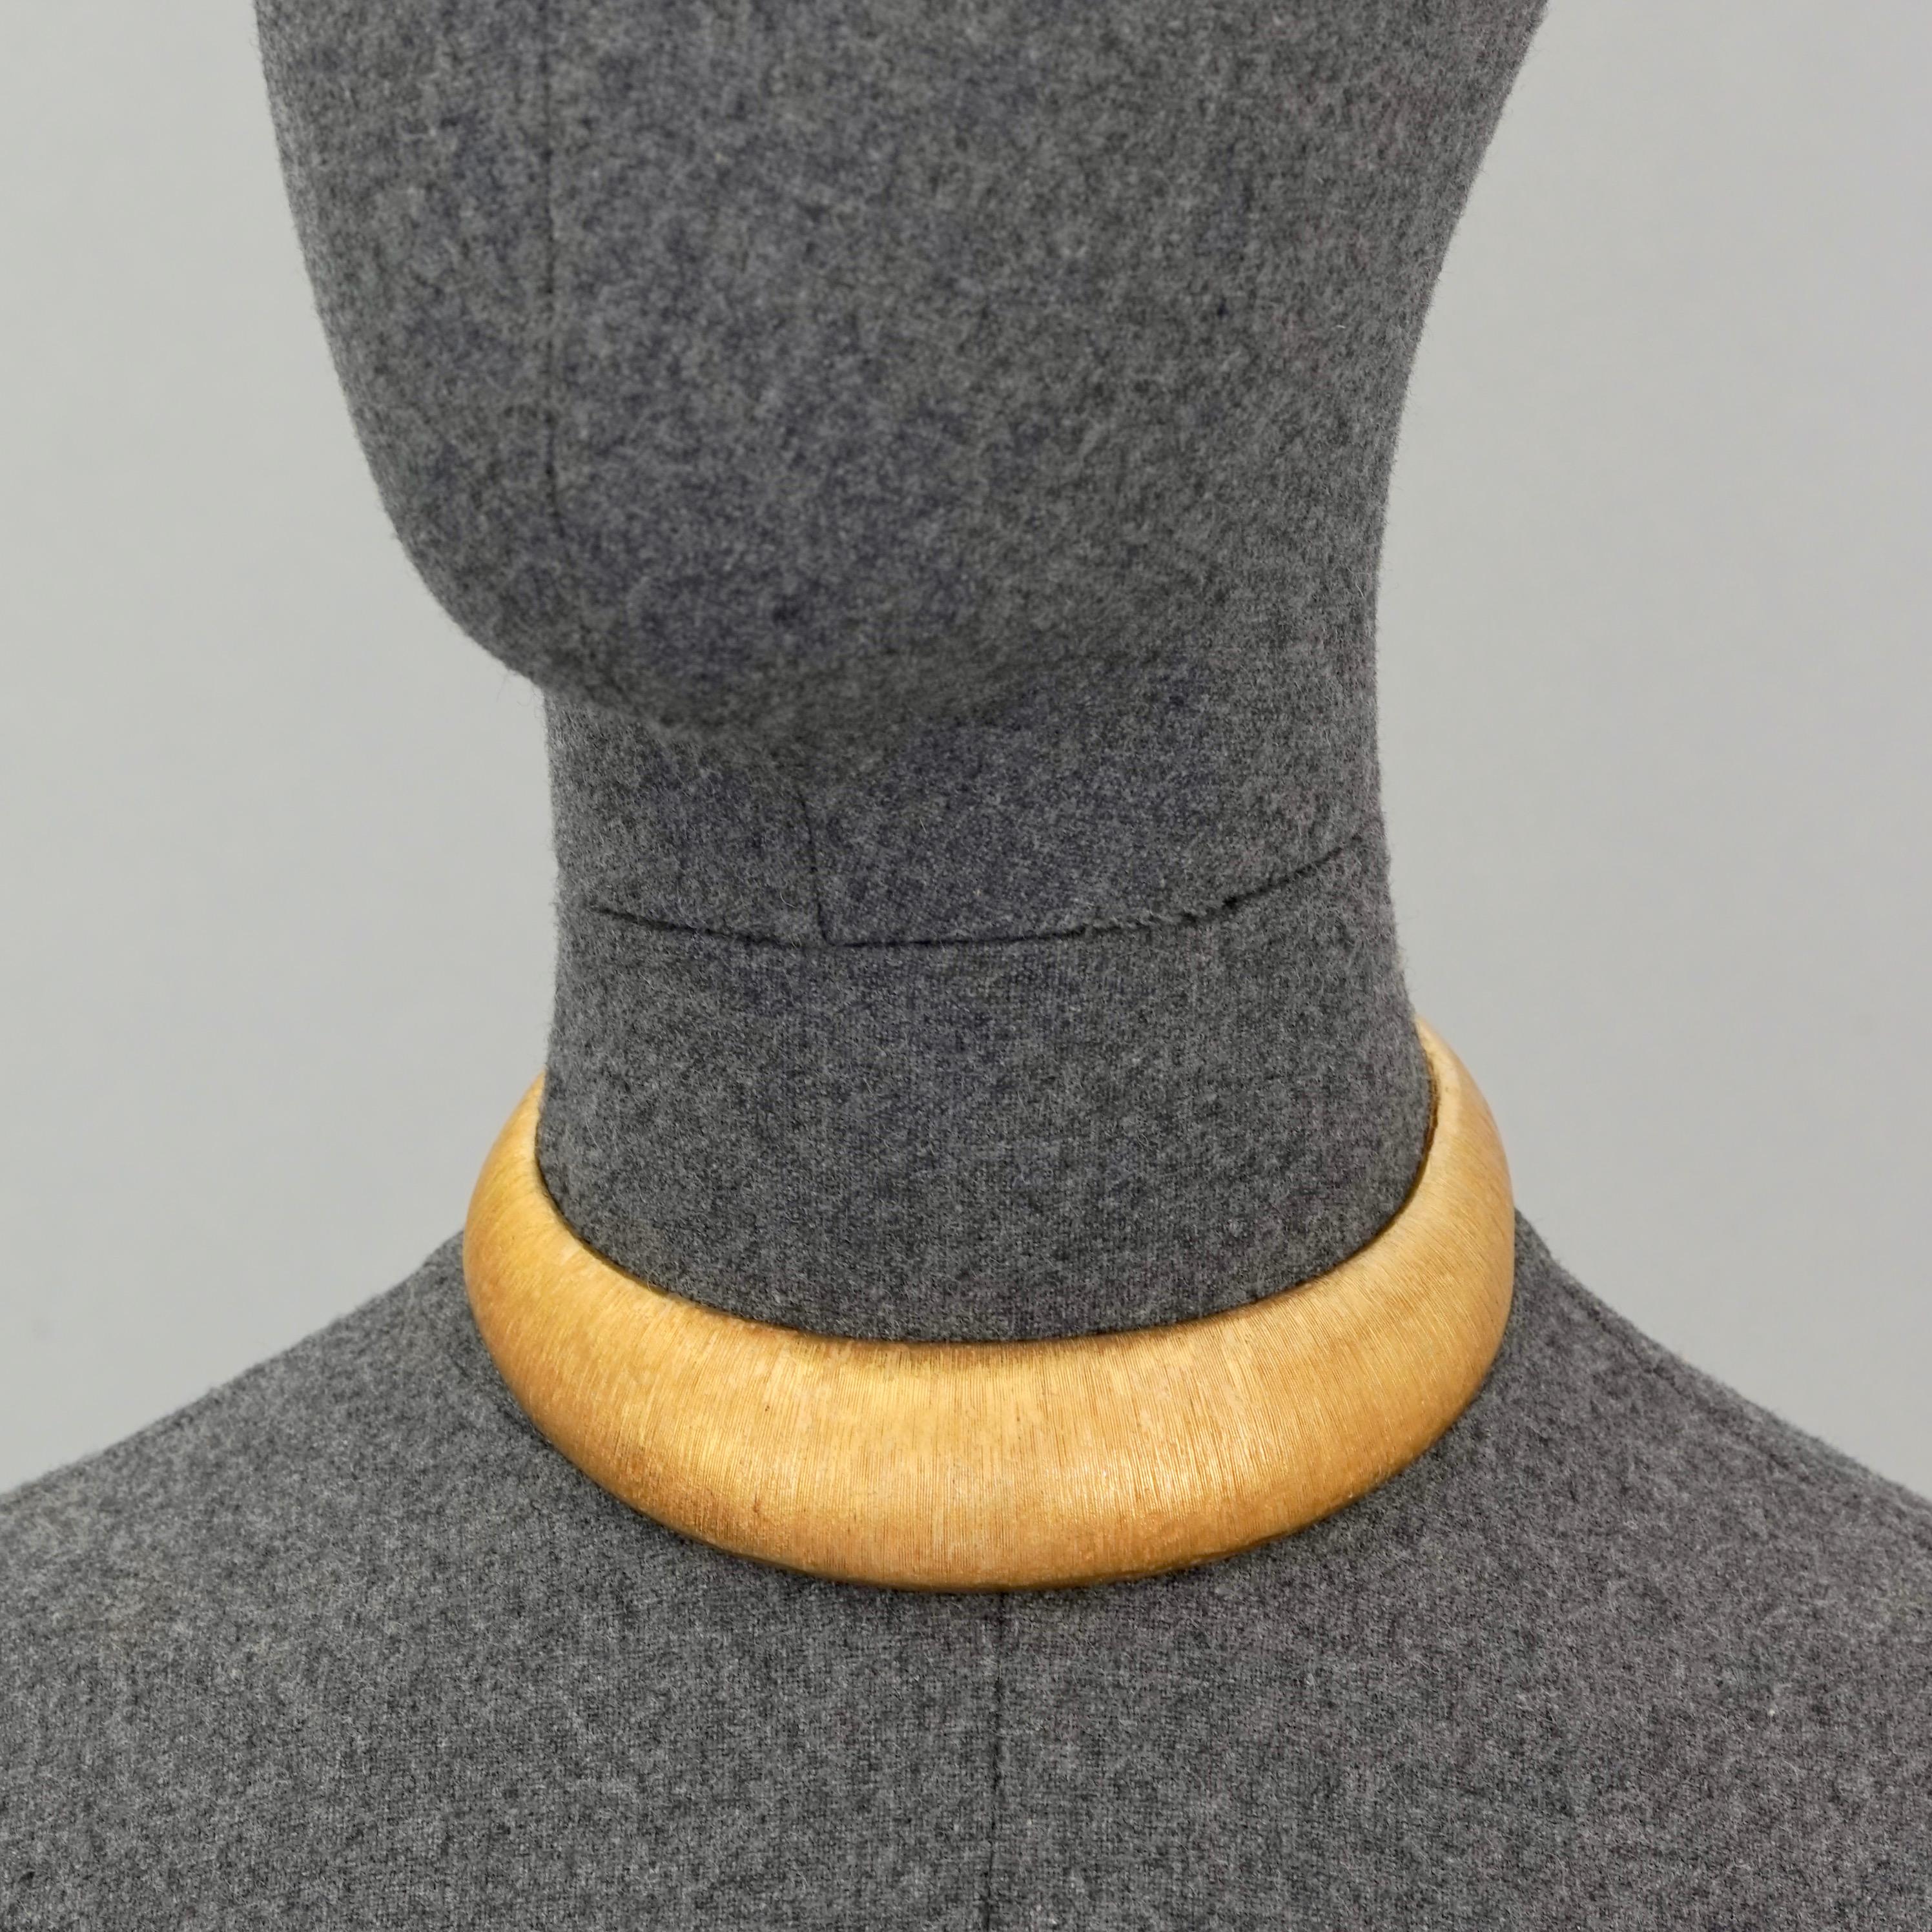 Vintage ROBERT GOOSSENS Textured Brushed Gold Rigid Choker Necklace

Measurements:
Height: 0.98 inch (2.5 cm)
Inner Circumference: 12.60 inches (32 cm) includes opening

Features:
- 100% Authentic YVES SAINT LAURENT.
- Textured rigid choker